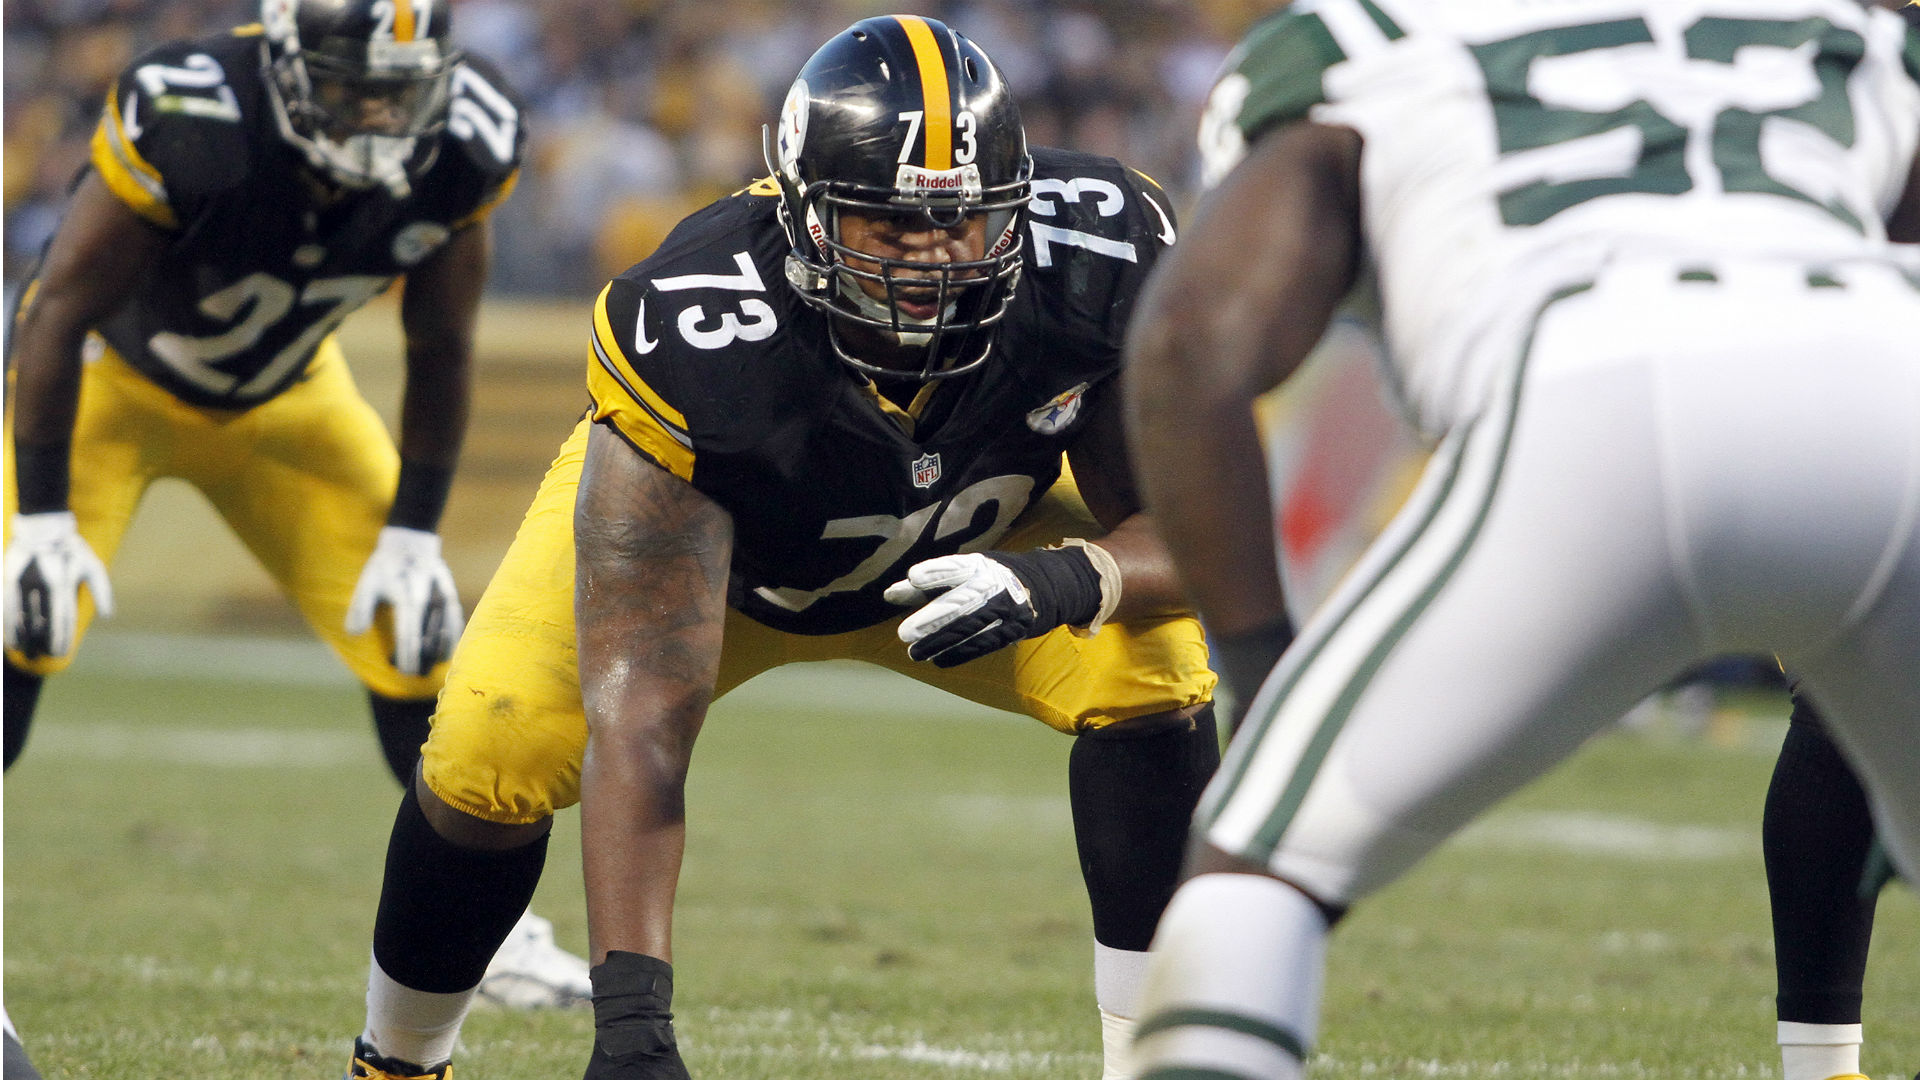 Ramon Foster injury update: Steelers guard aiming to play against Browns in Week 1